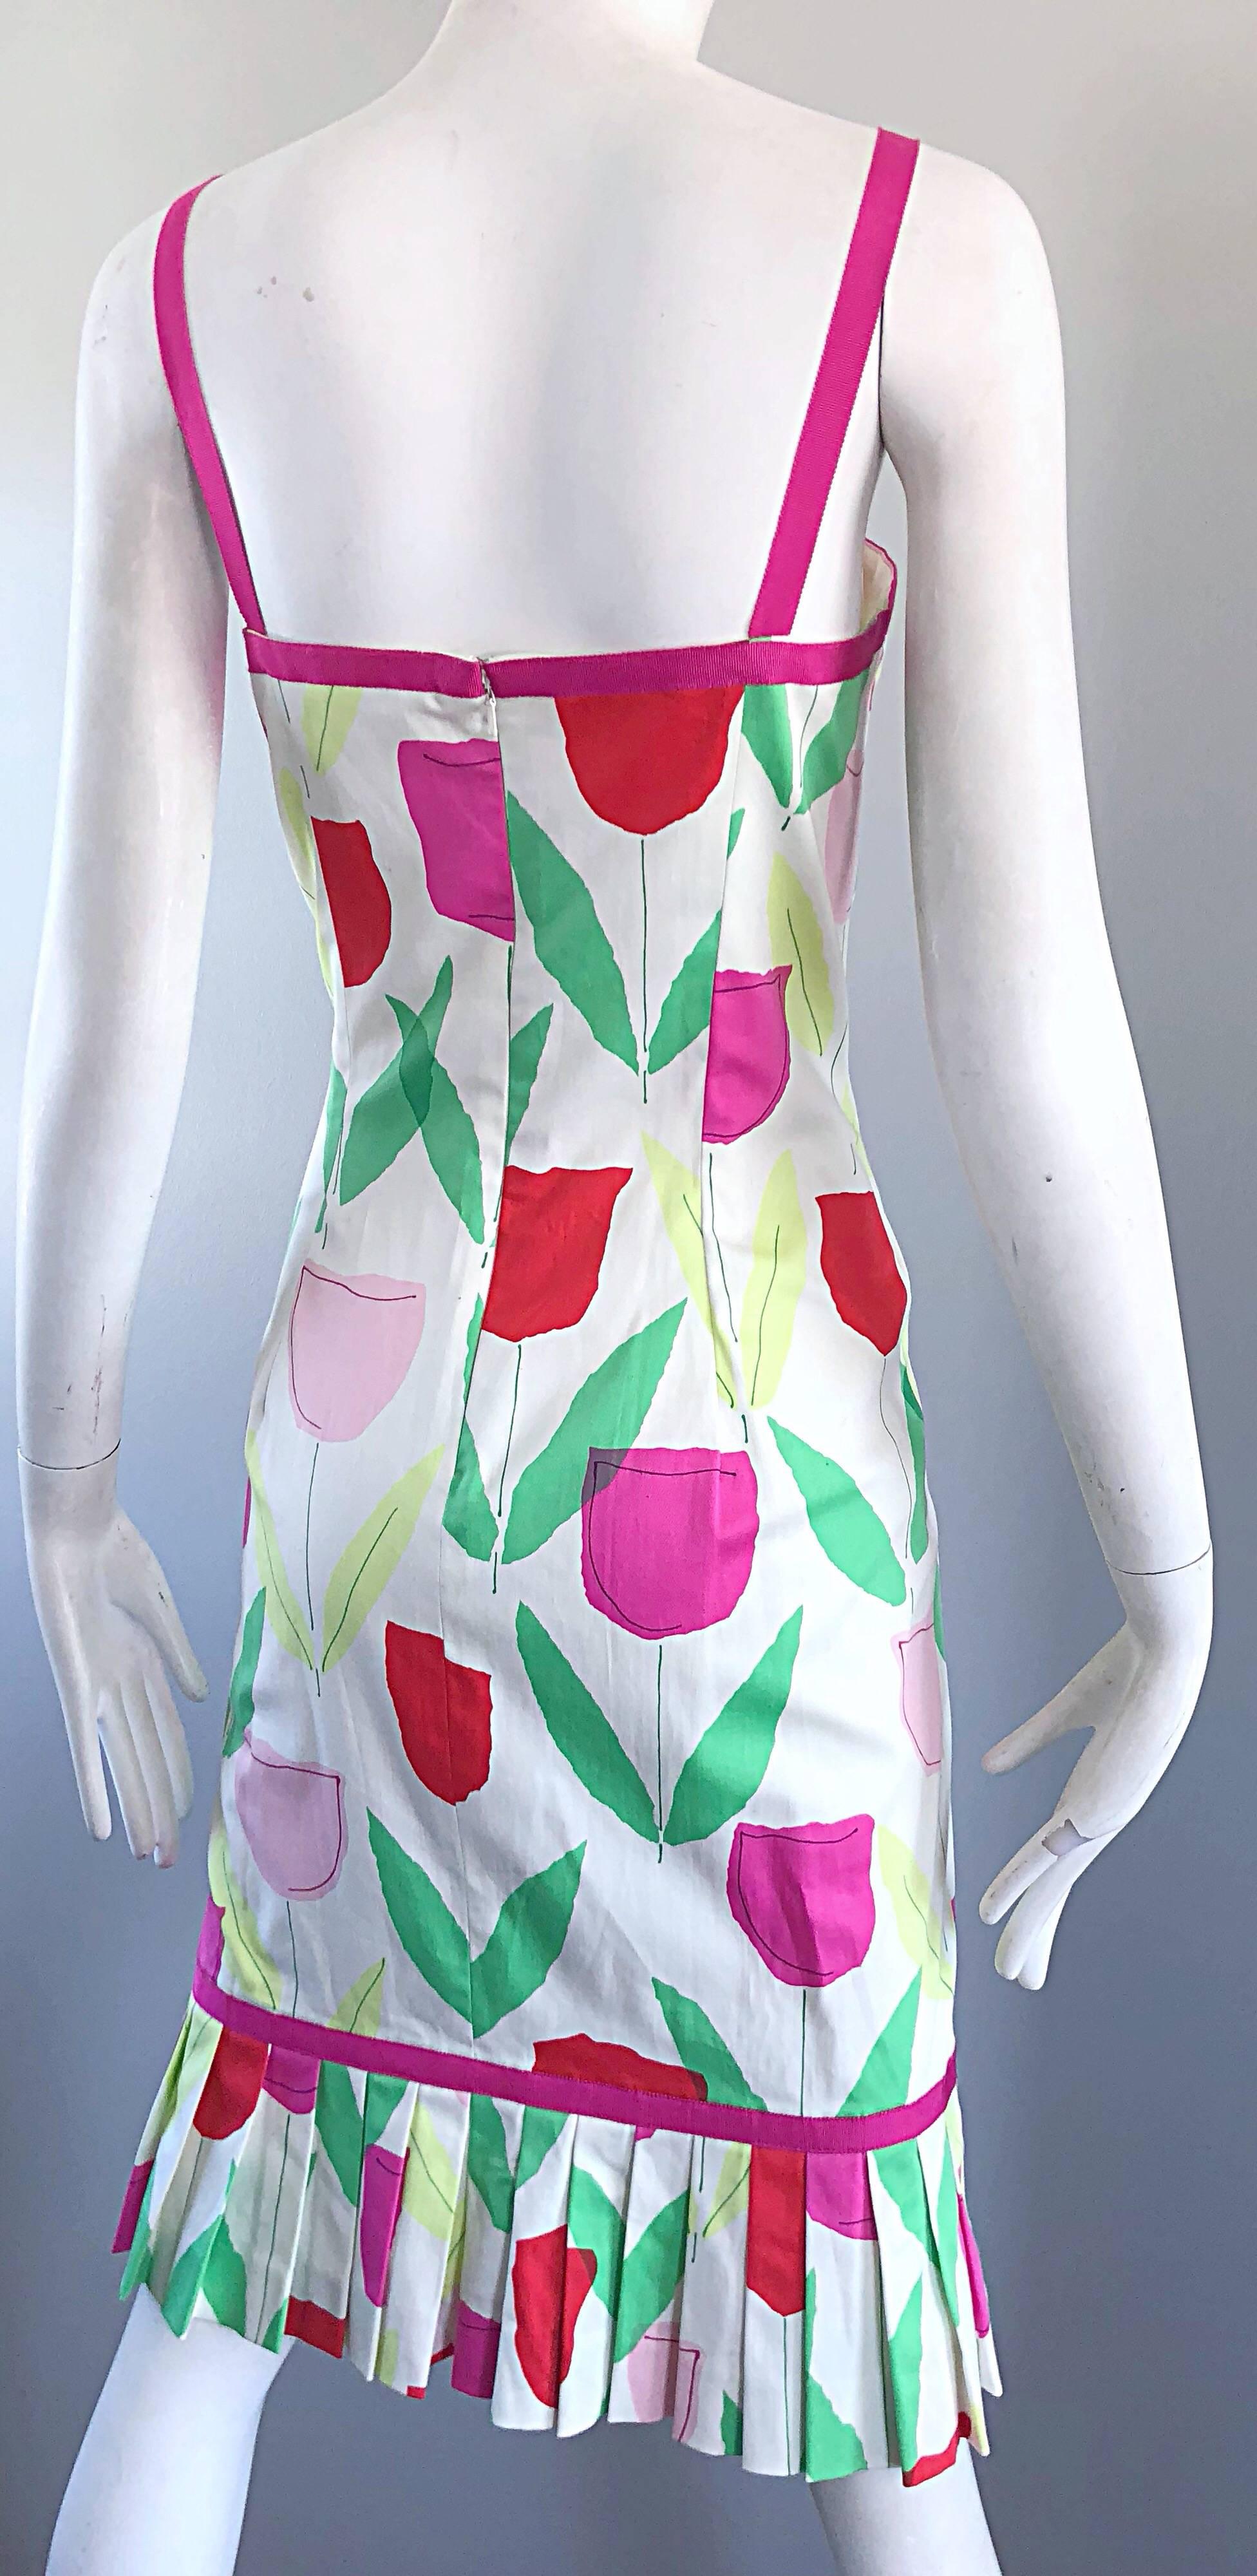 1990s Moschino Cheap & Chic Pink + Red + Green Tulip / Rose Print Vintage Dress 6